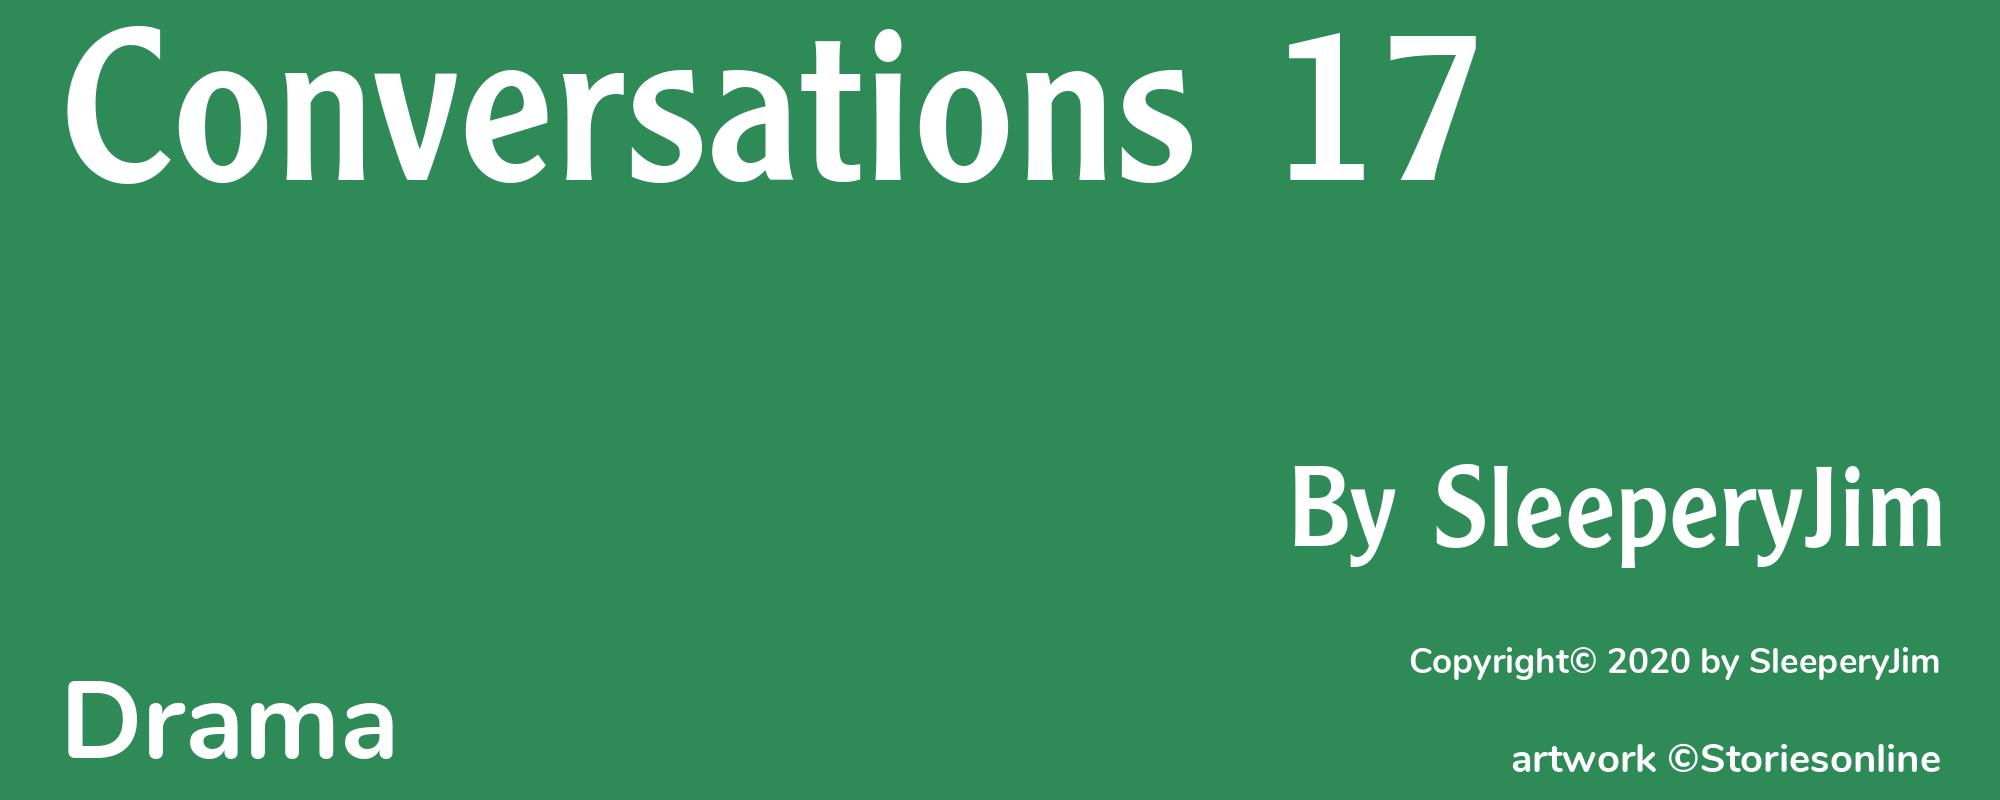 Conversations 17 - Cover